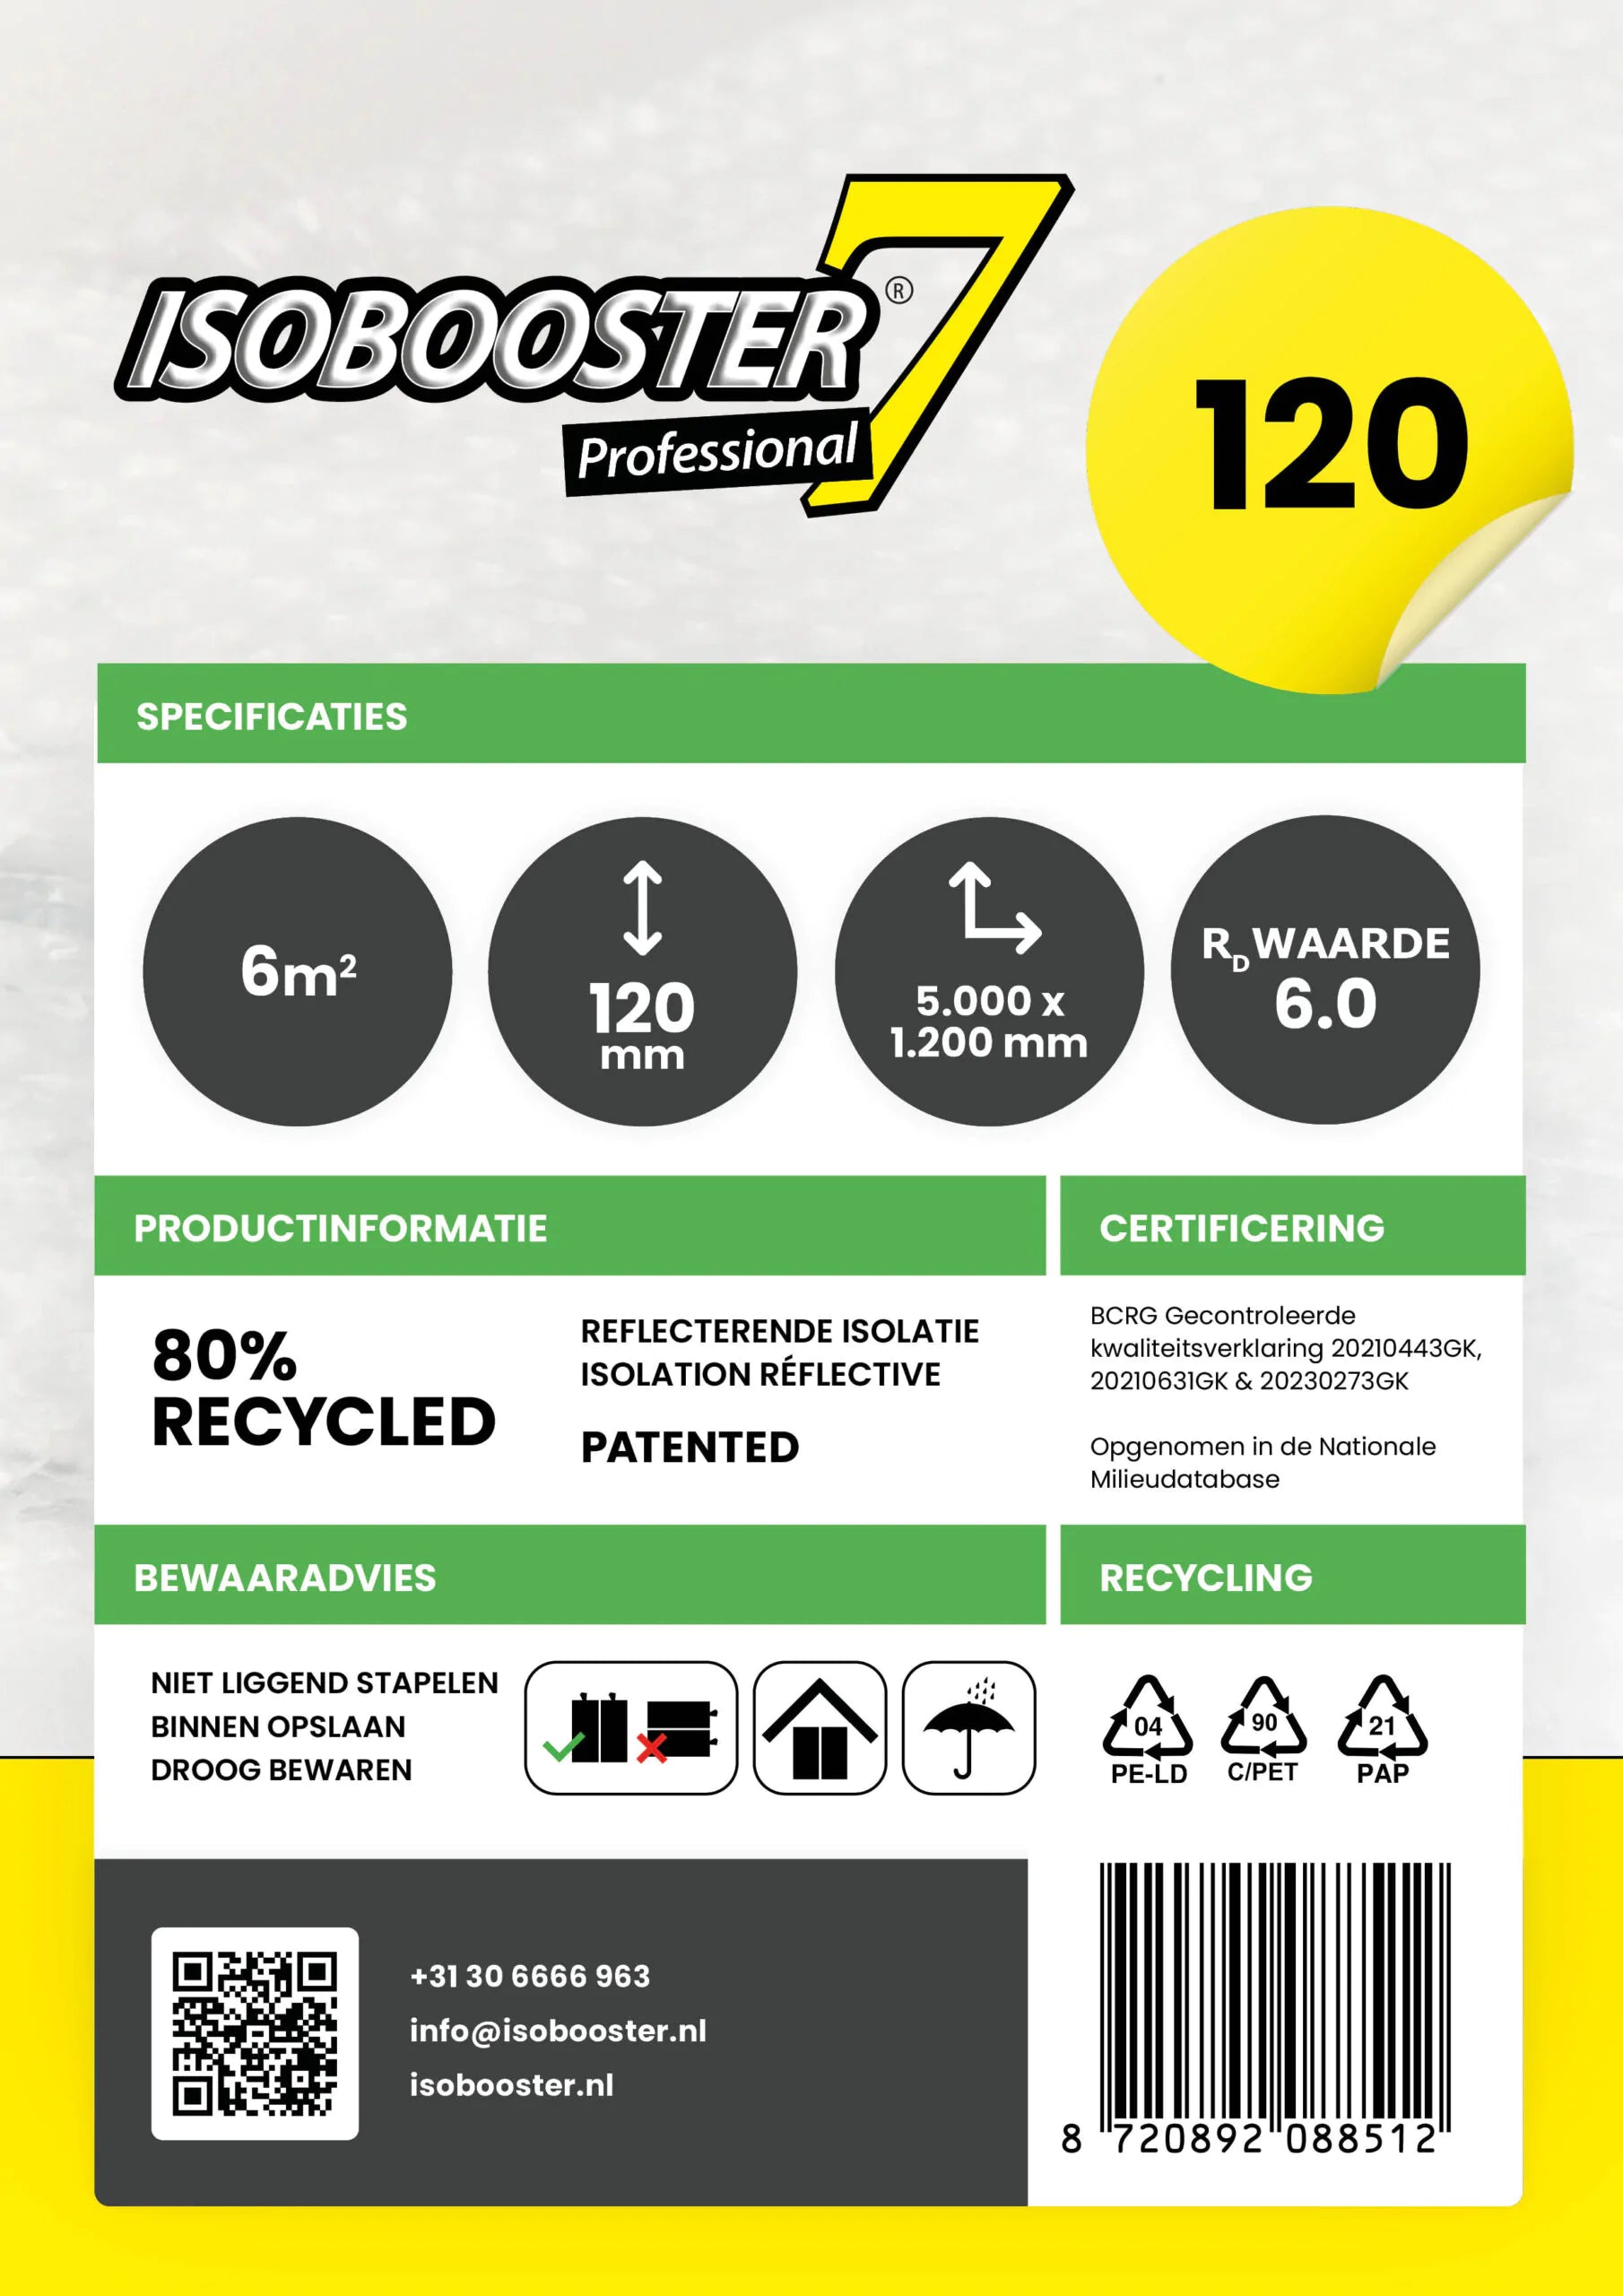 Isobooster Professional 120mm